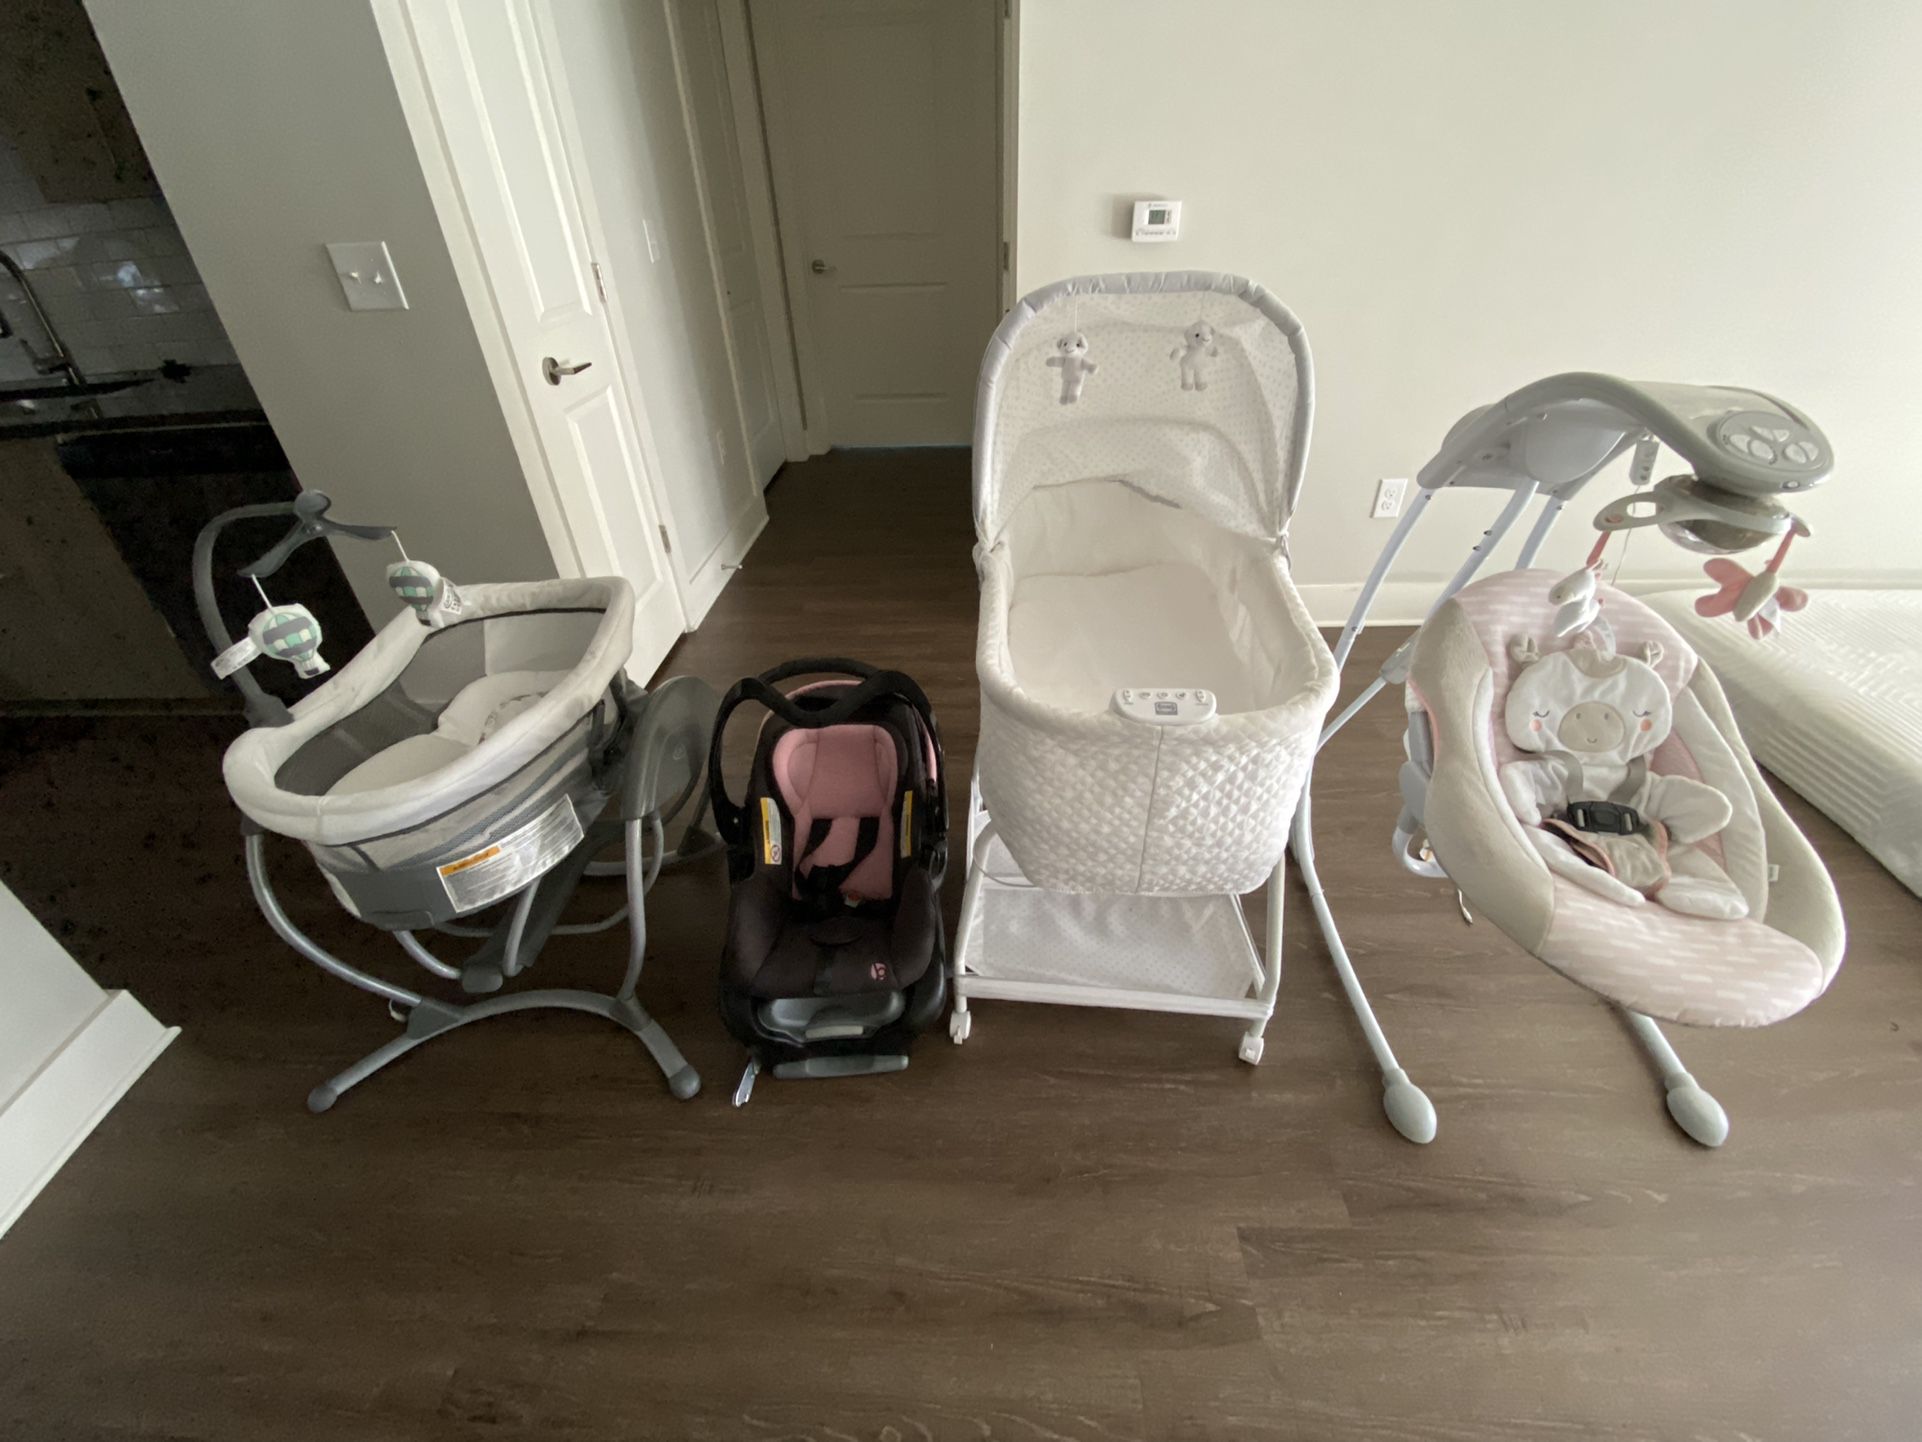 Baby swing, baby car seat, baby auto glide bassinet and cradle swing